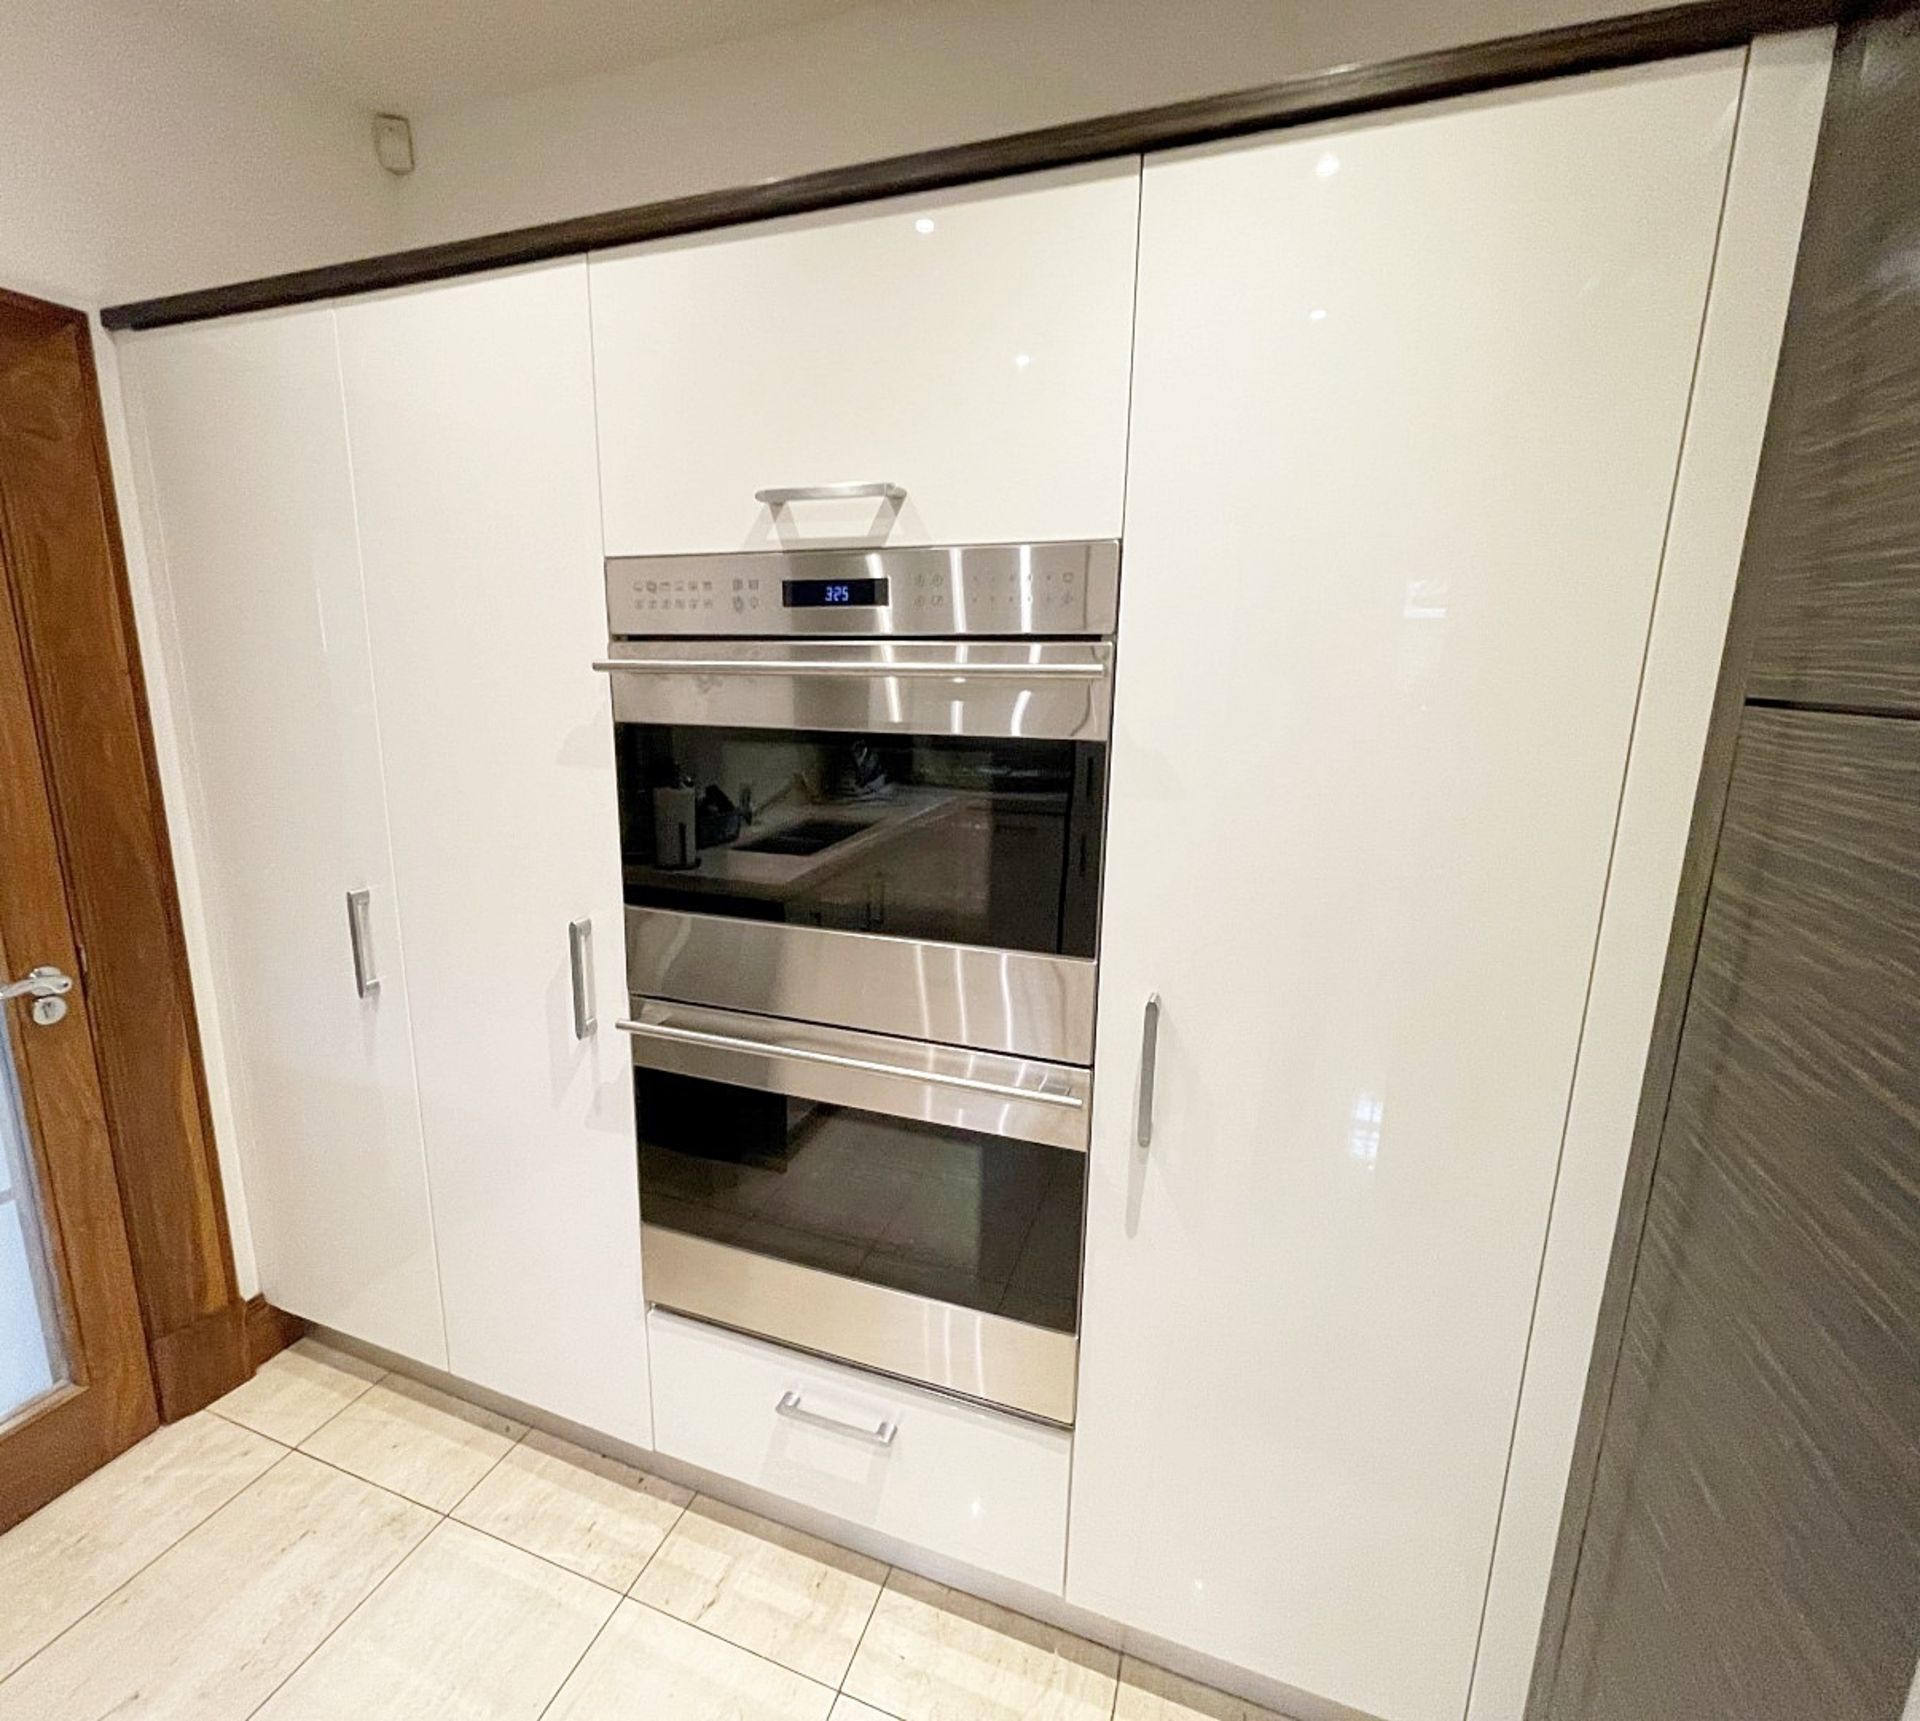 1 x Bespoke Fitted Mowlem & Co Kitchen With Miele and Sub Zero Appliances & Granite Worktops - - Image 43 of 54